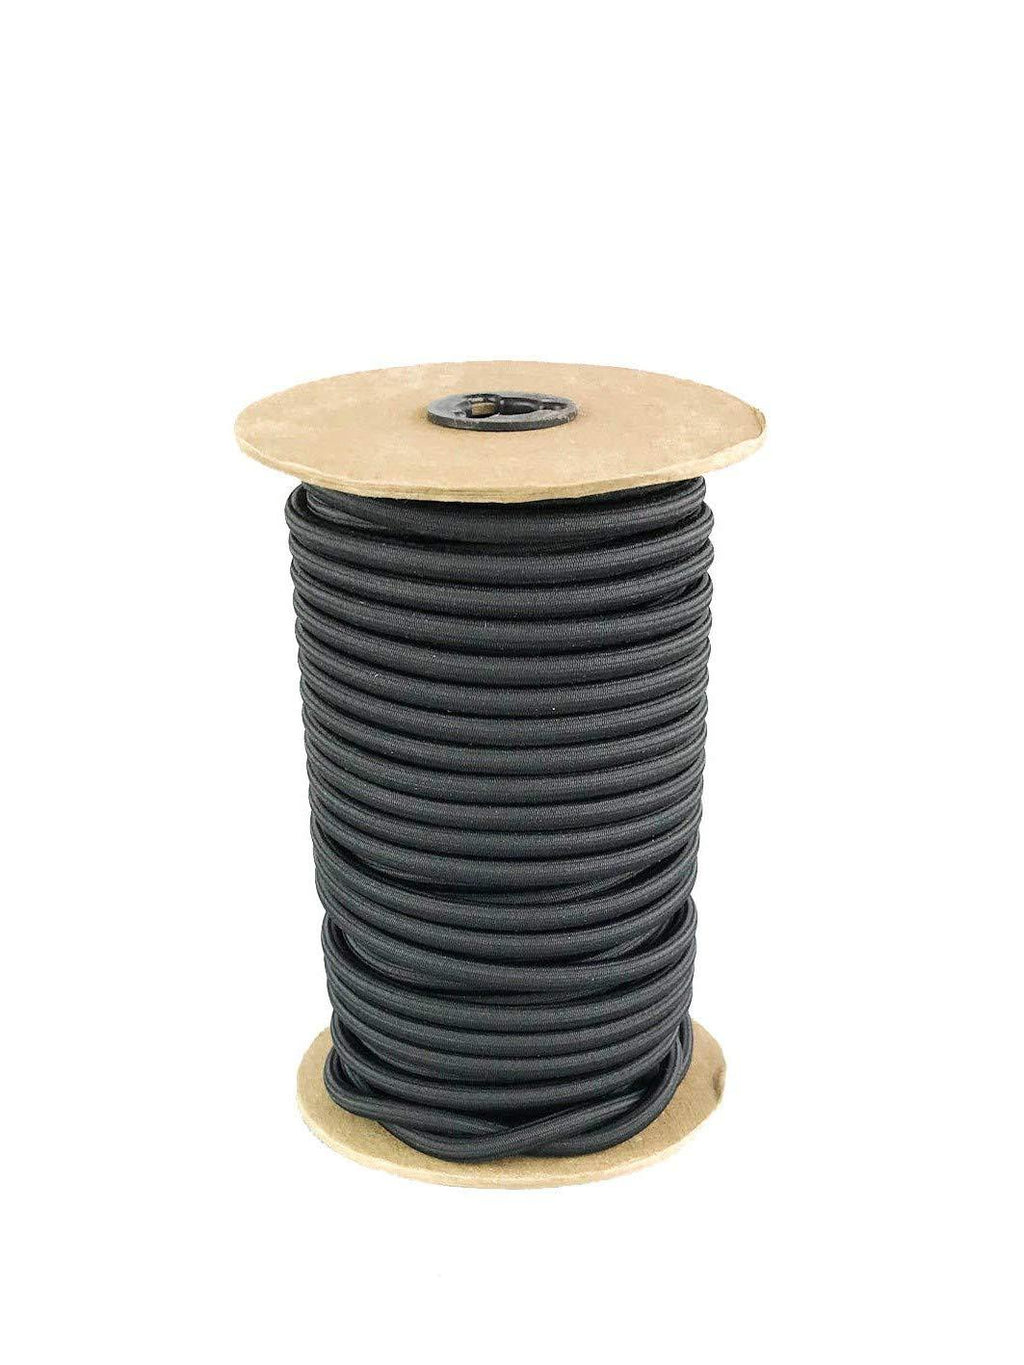  [AUSTRALIA] - Elastic Bungee Cord. 3/16", 3/8", 1/4", 5/16", 1/8". 50 and 100 Foot Spools. Weather and Abrasion Resistant. Used for Tie Downs, Crafting, DIY Projects. Black Shock Cord. Made in the USA 5/16 inch x 50 feet